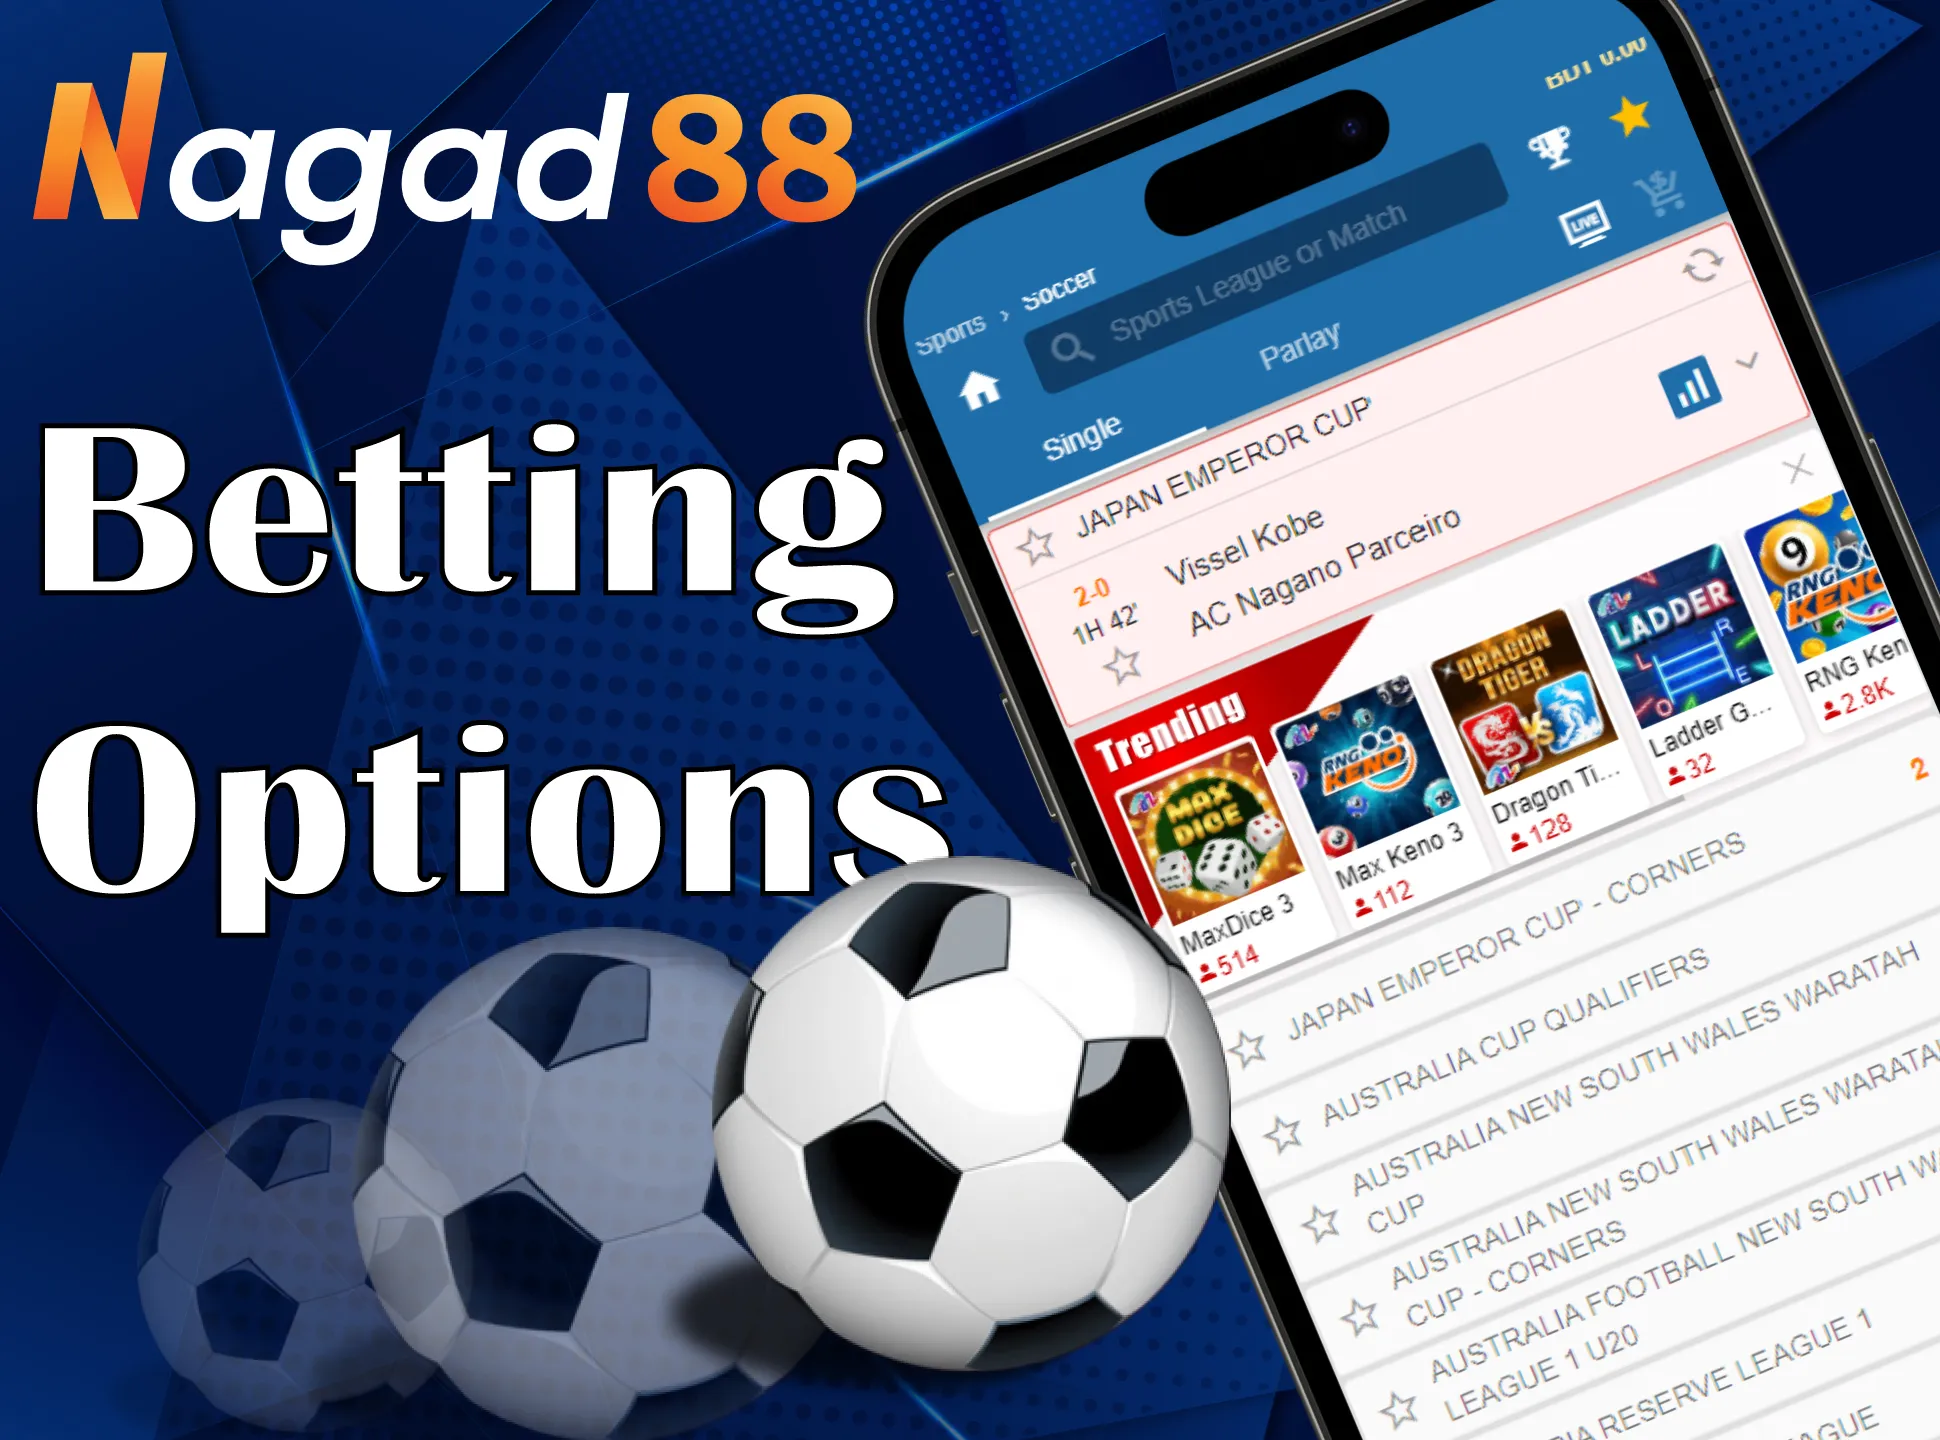 A variety of betting options are available to you in the Nagad88 app.